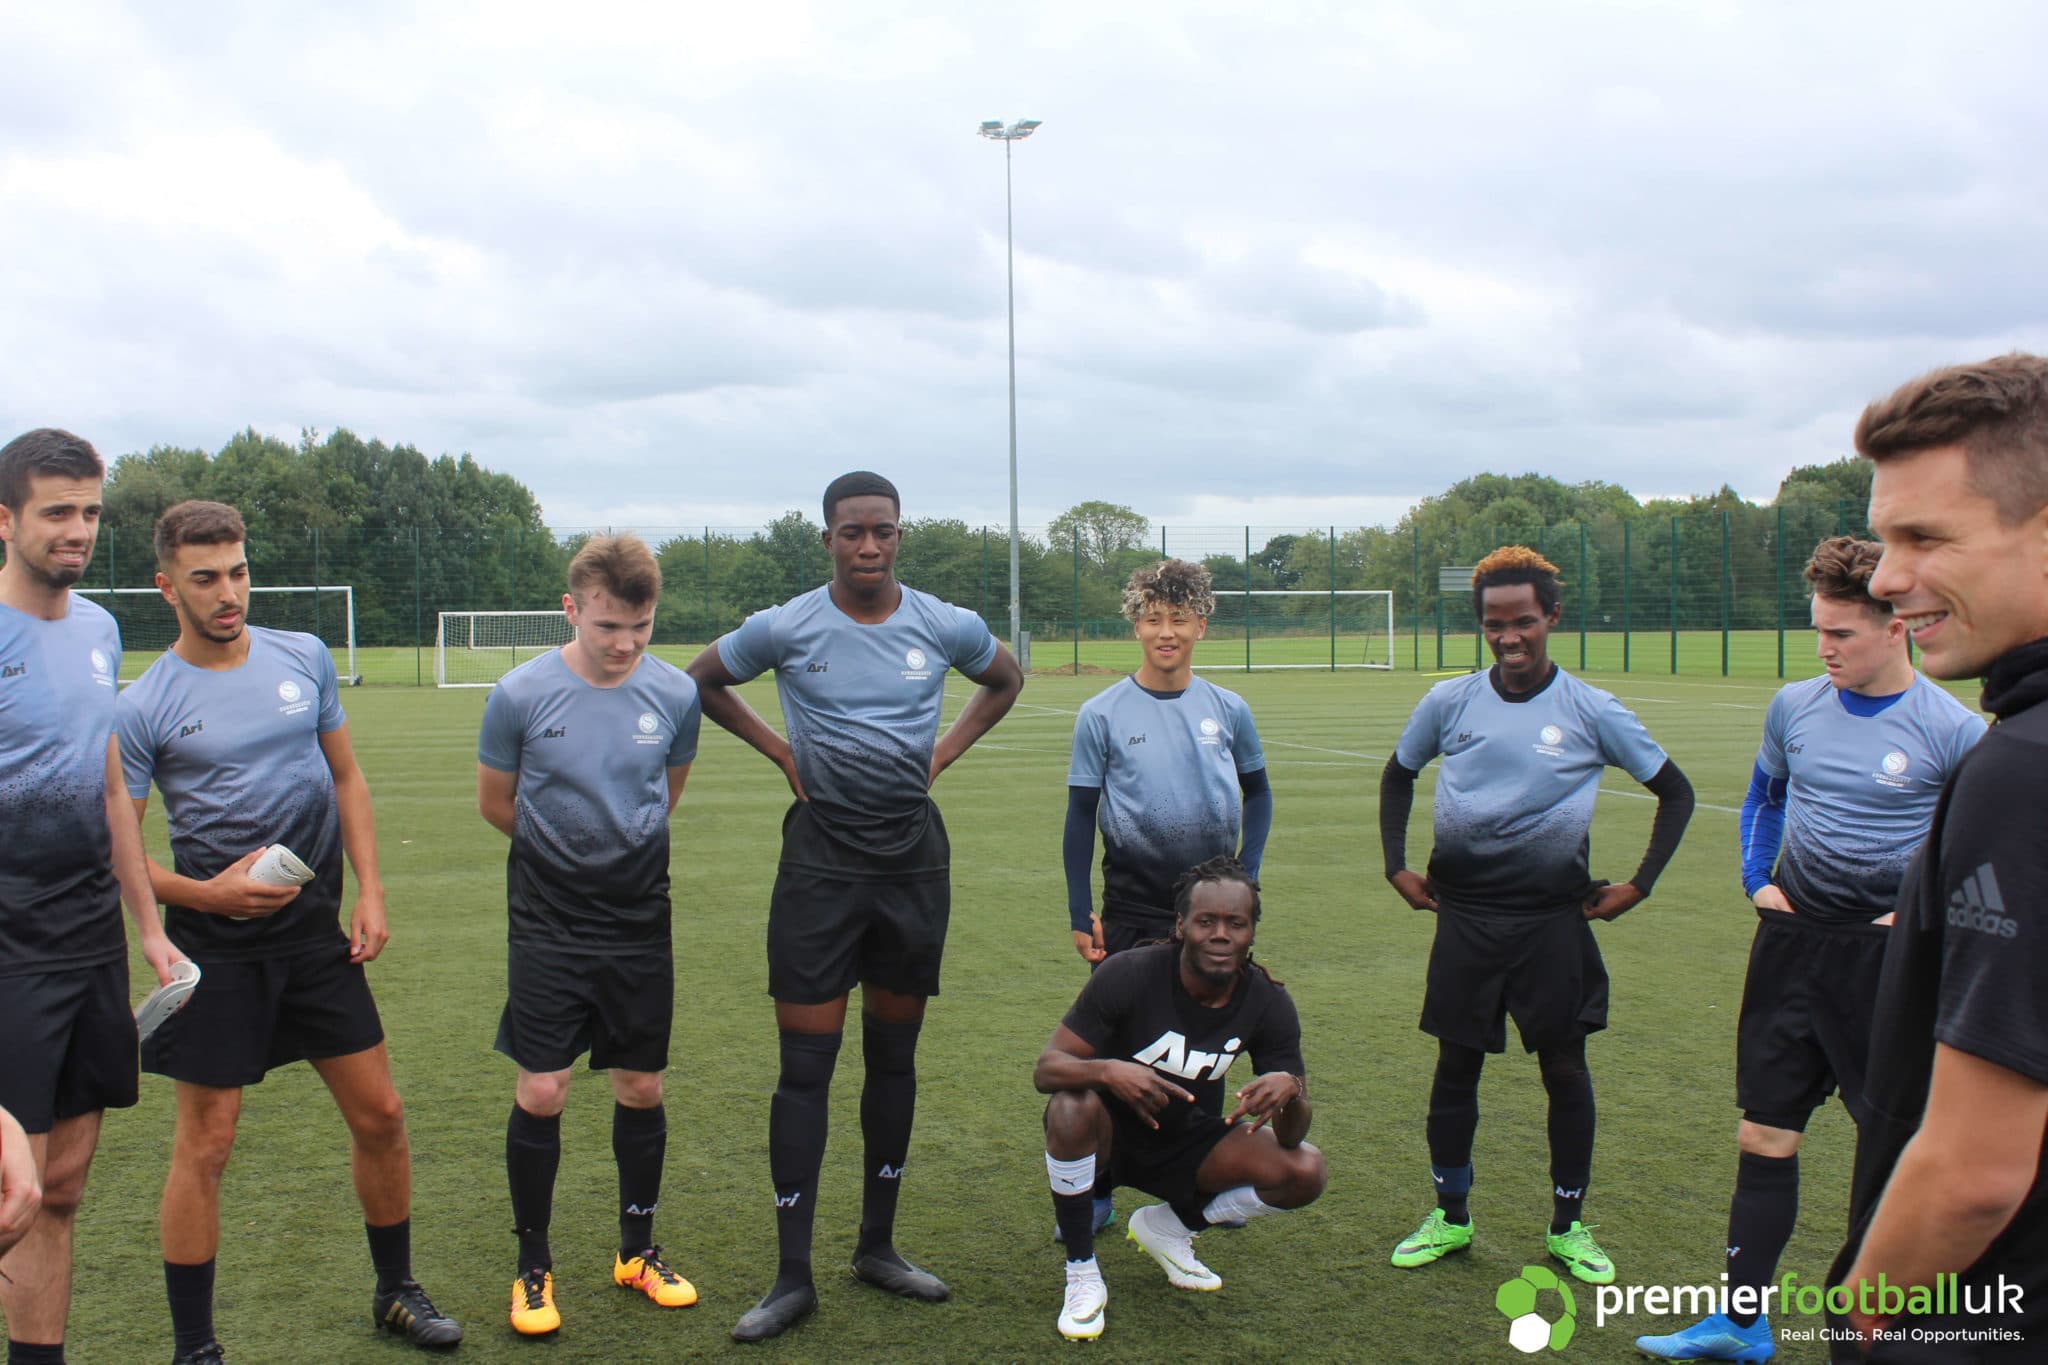 TIPS ON HOW TO IMPRESS AT A PROFESSIONAL FOOTBALL TRIAL - Premier Football  UK